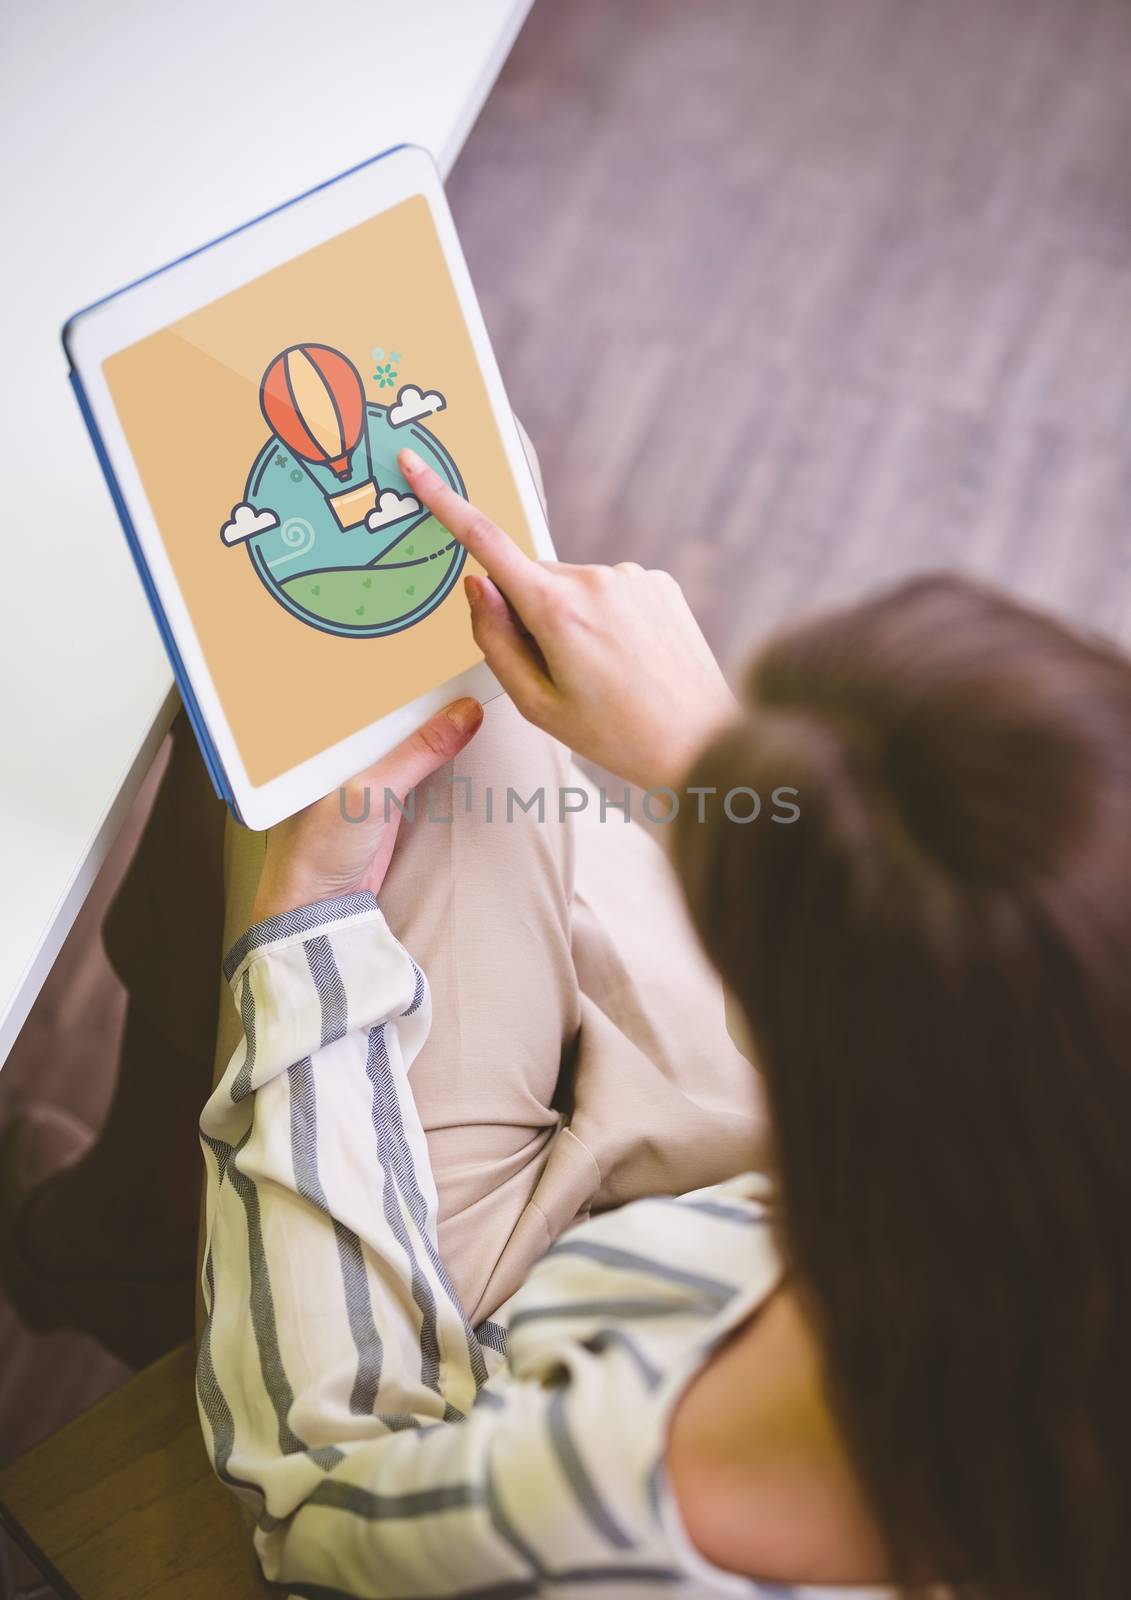 Digital composite of Woman holding a tablet with travel icon on the screen